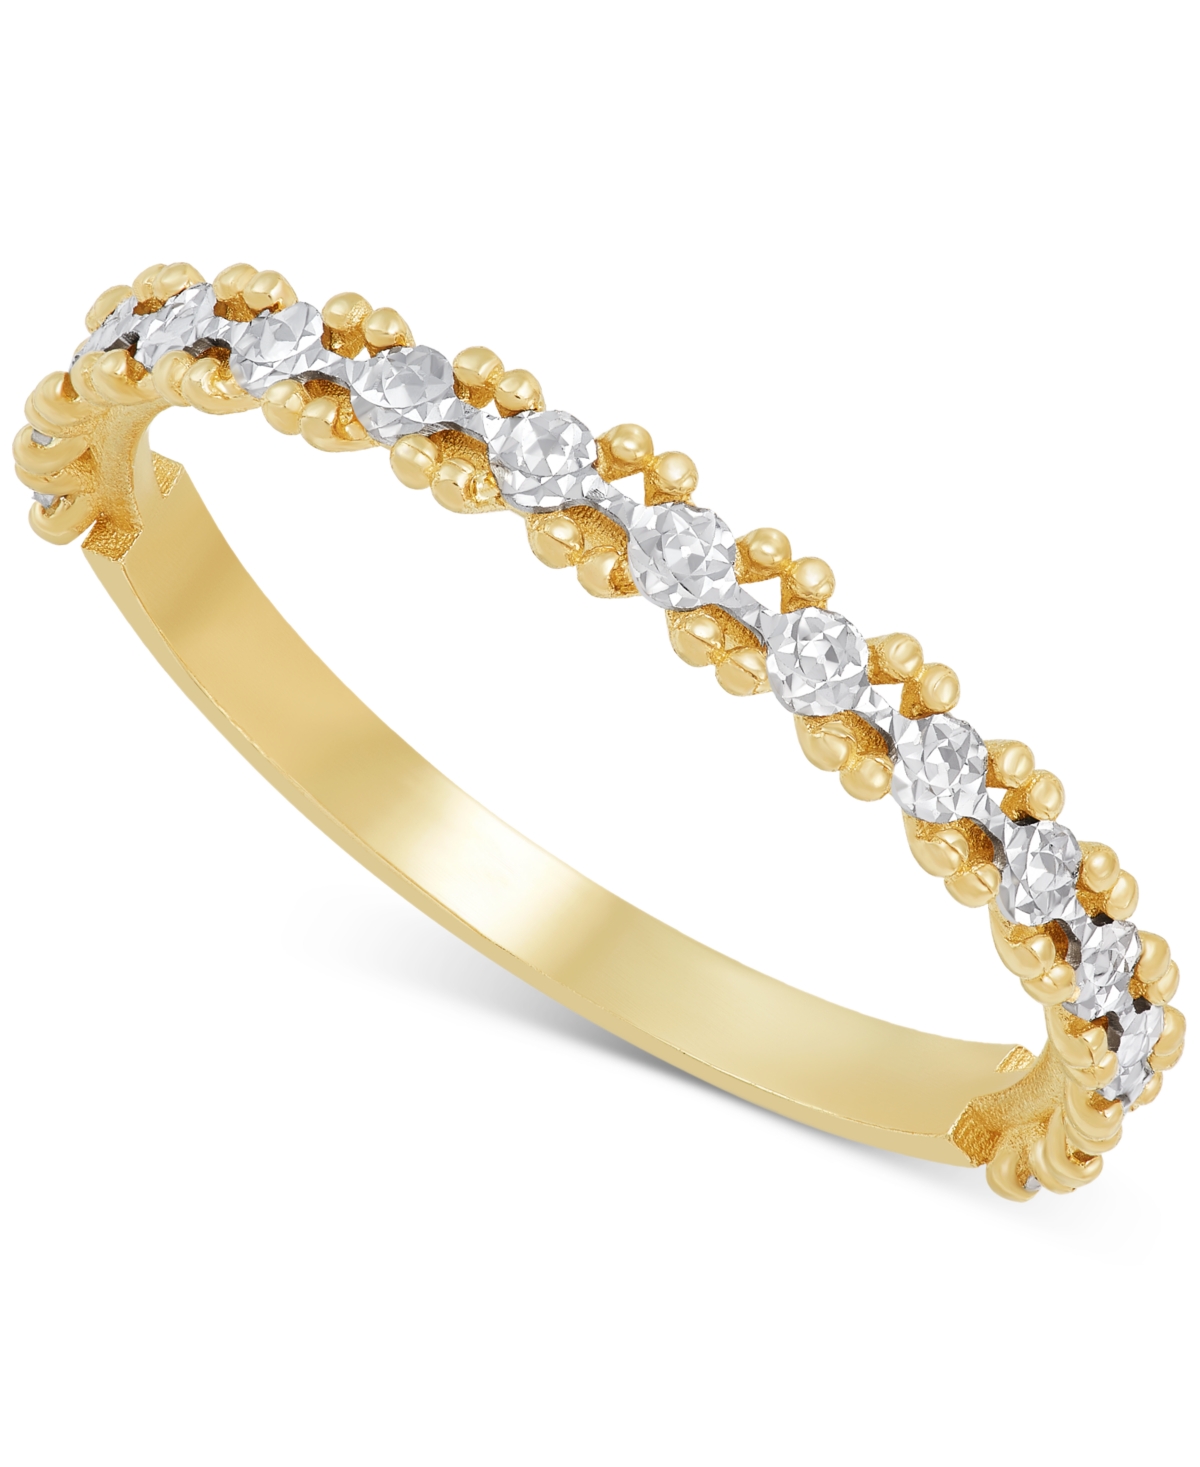 Textured Illusion Narrow Stack Ring in 10k Two-Tone Gold, Created for Macy's - Gold